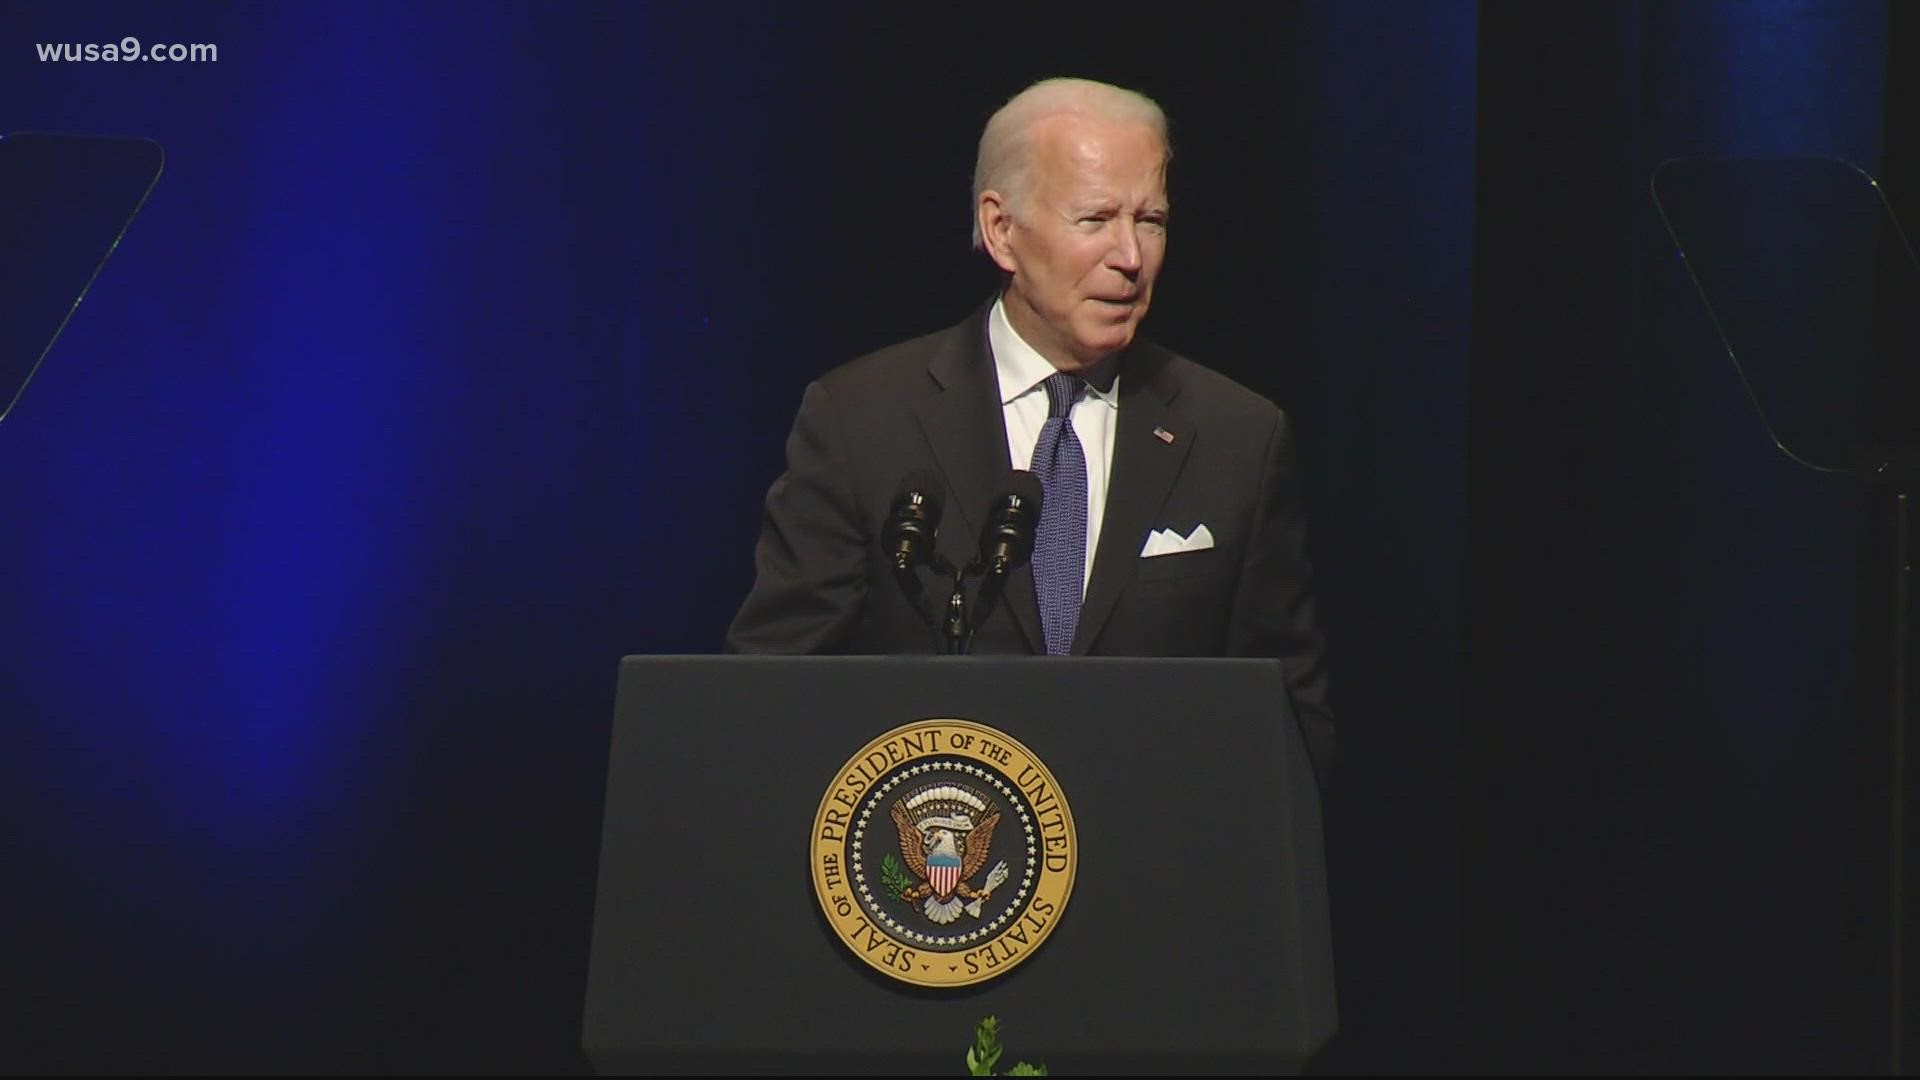 President Joe Biden and Former President Barack Obama were in Las Vegas for the 82-year-old former Senate Majority Leader from Nevada who died of pancreatic cancer.